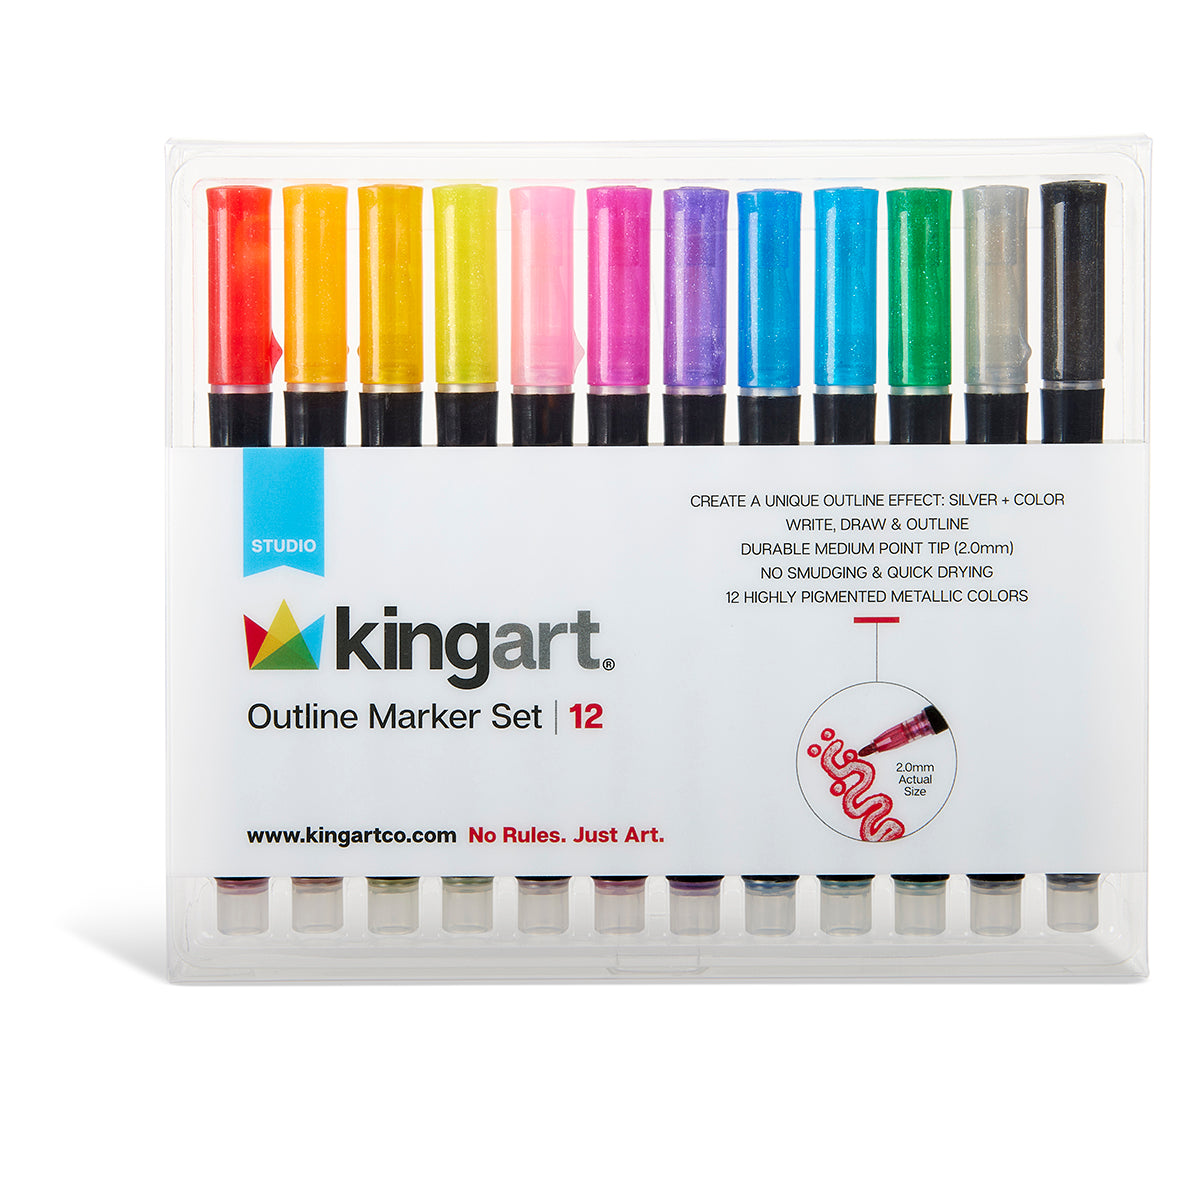 KINGART? Outline Markers - 12 pc. Set, Metallic Silver with Color Outlines